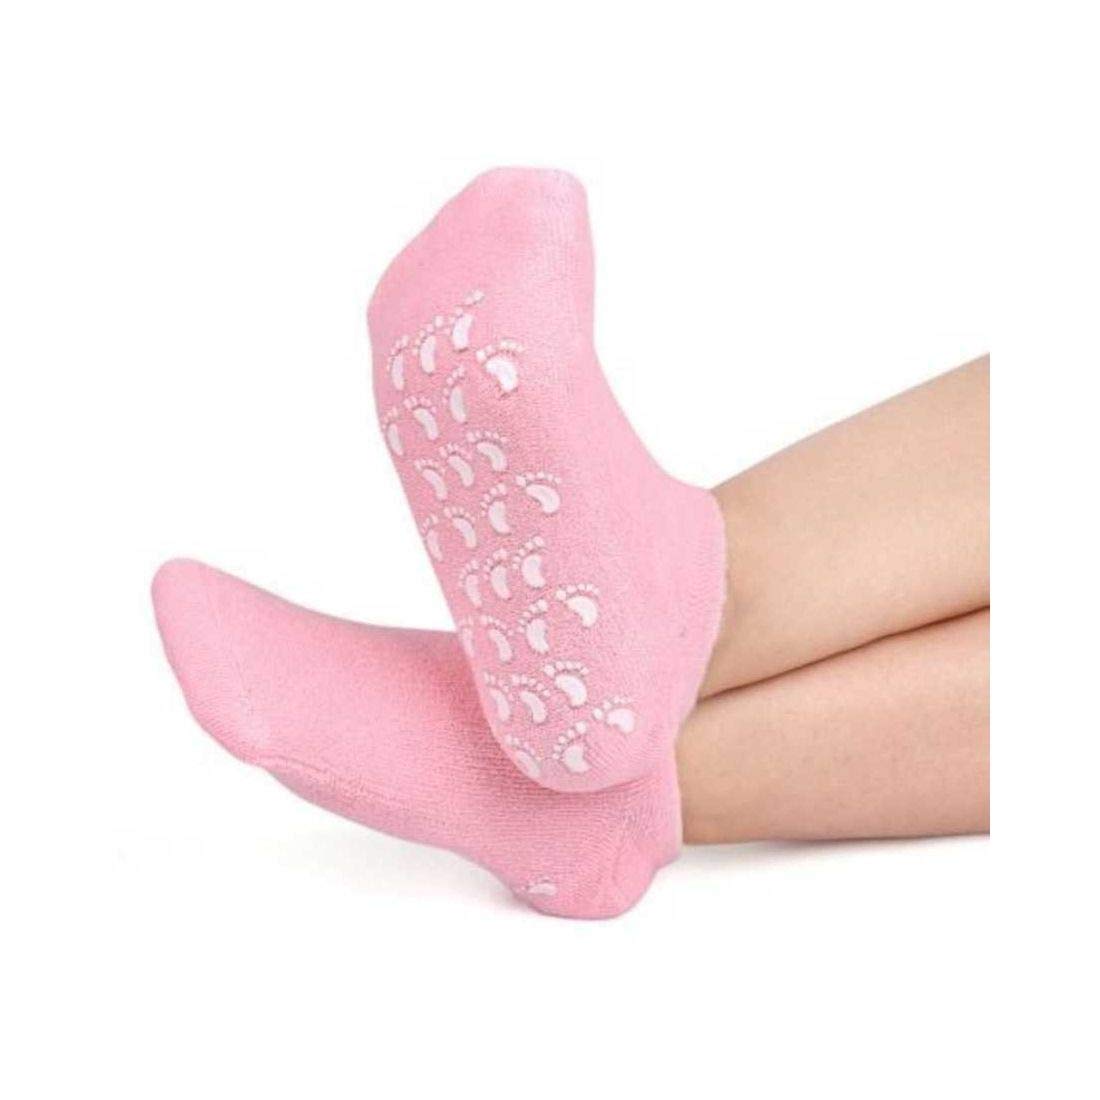 1 Pair Silicone Moisturizing Socks Moisturizing Silicone Gel Socks For Dry, Cracked  Heels And Rough Skin - Pedicure Socks For Women And Men - Foot Care Tool  For Softening And Repairing Feet | SHEIN USA